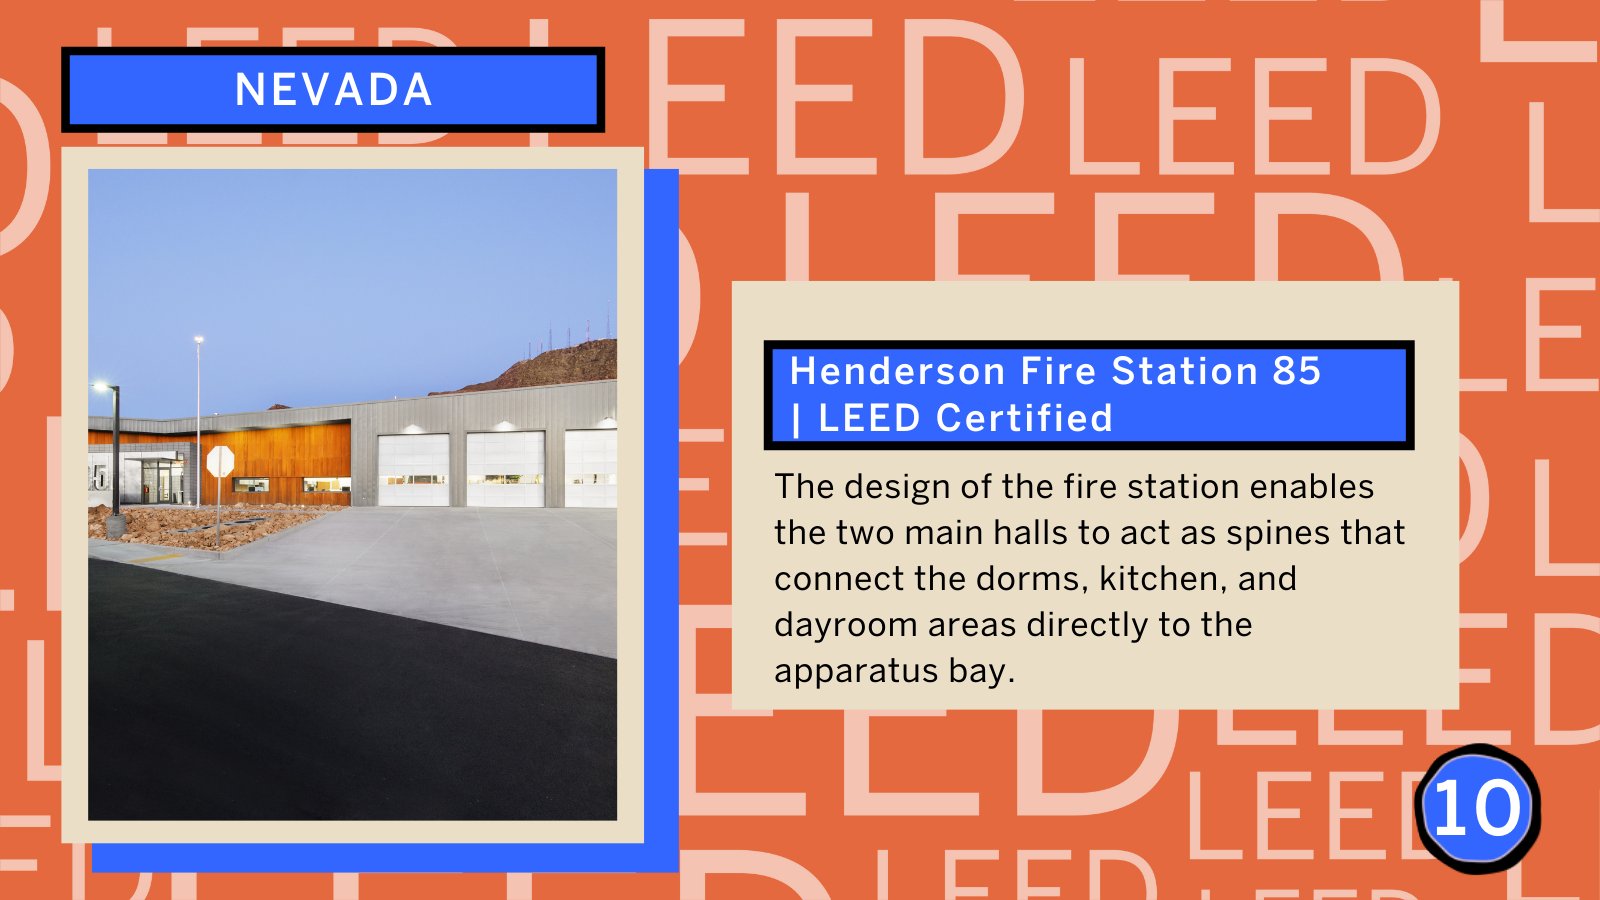 Nevada graphic showing the state as 10 in top ten green building states, highlighting the LEED certified Henderson fire station.